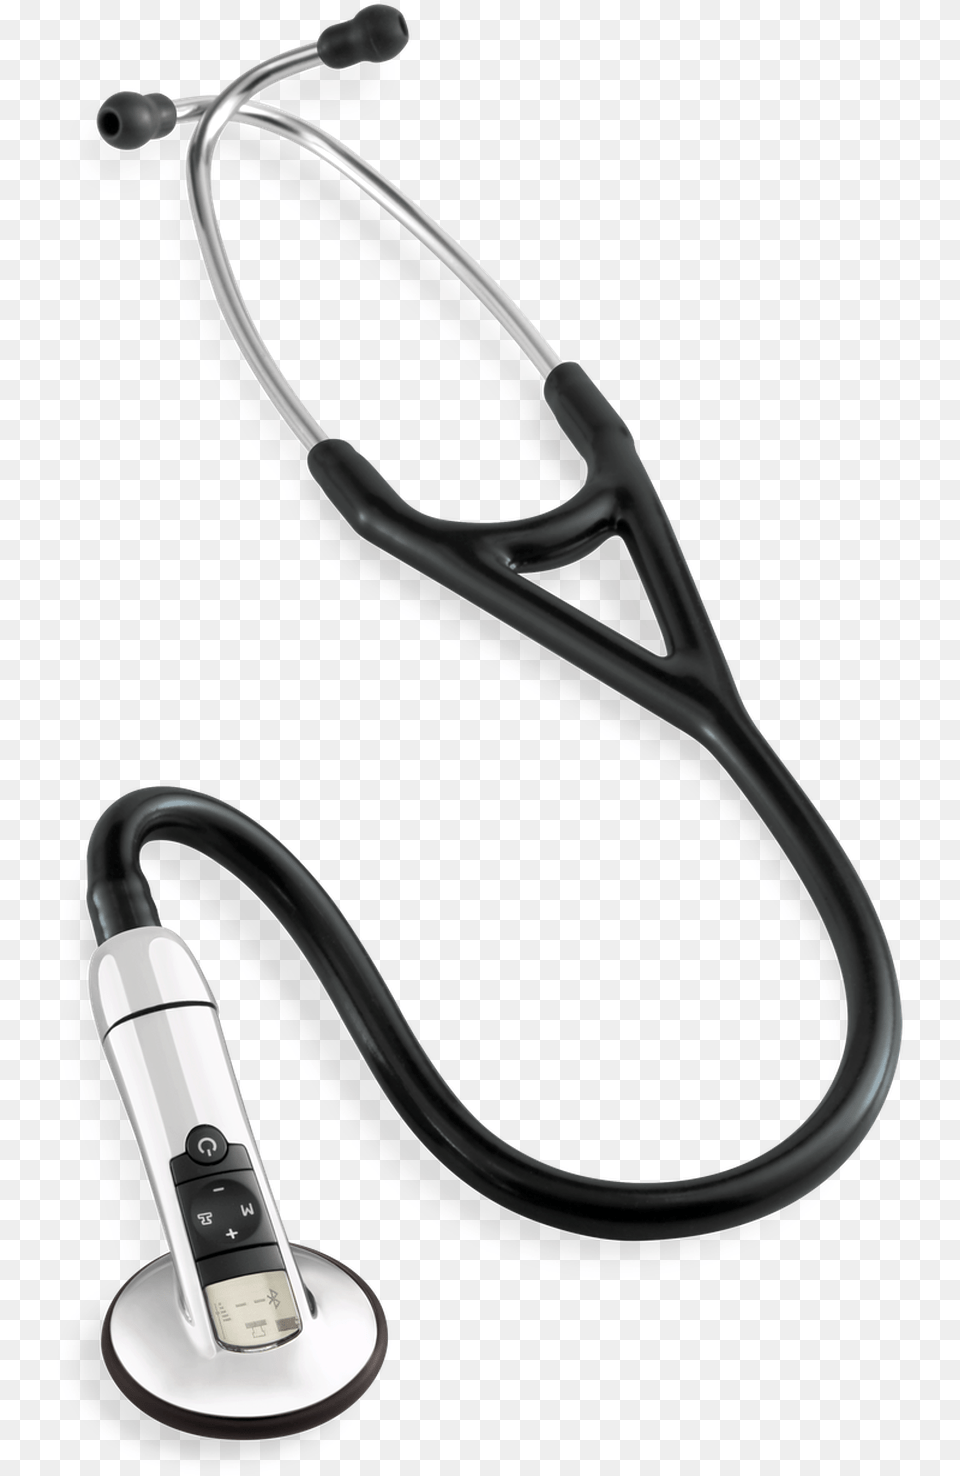 Electronic Stethoscope For Sale, Smoke Pipe Free Png